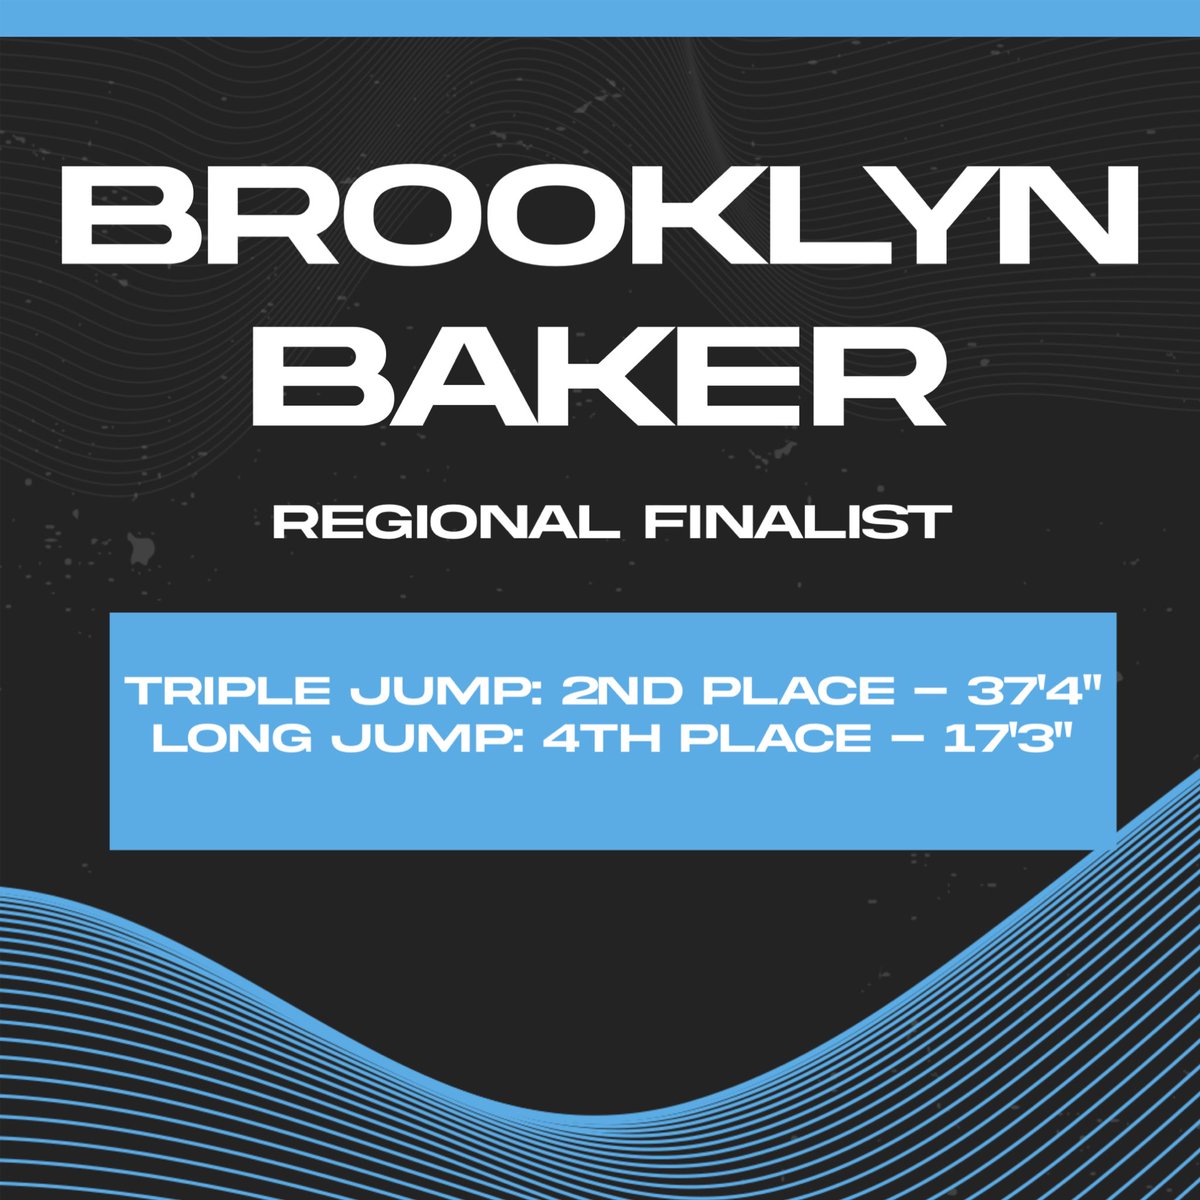 Here it is…. Brooklyn Baker moves on to regionals next week for Long and Triple Jump! Time to get to work!!!! #RegionalBound @coachluster2 @sudden47 @BwoodBucs @bportisdsports